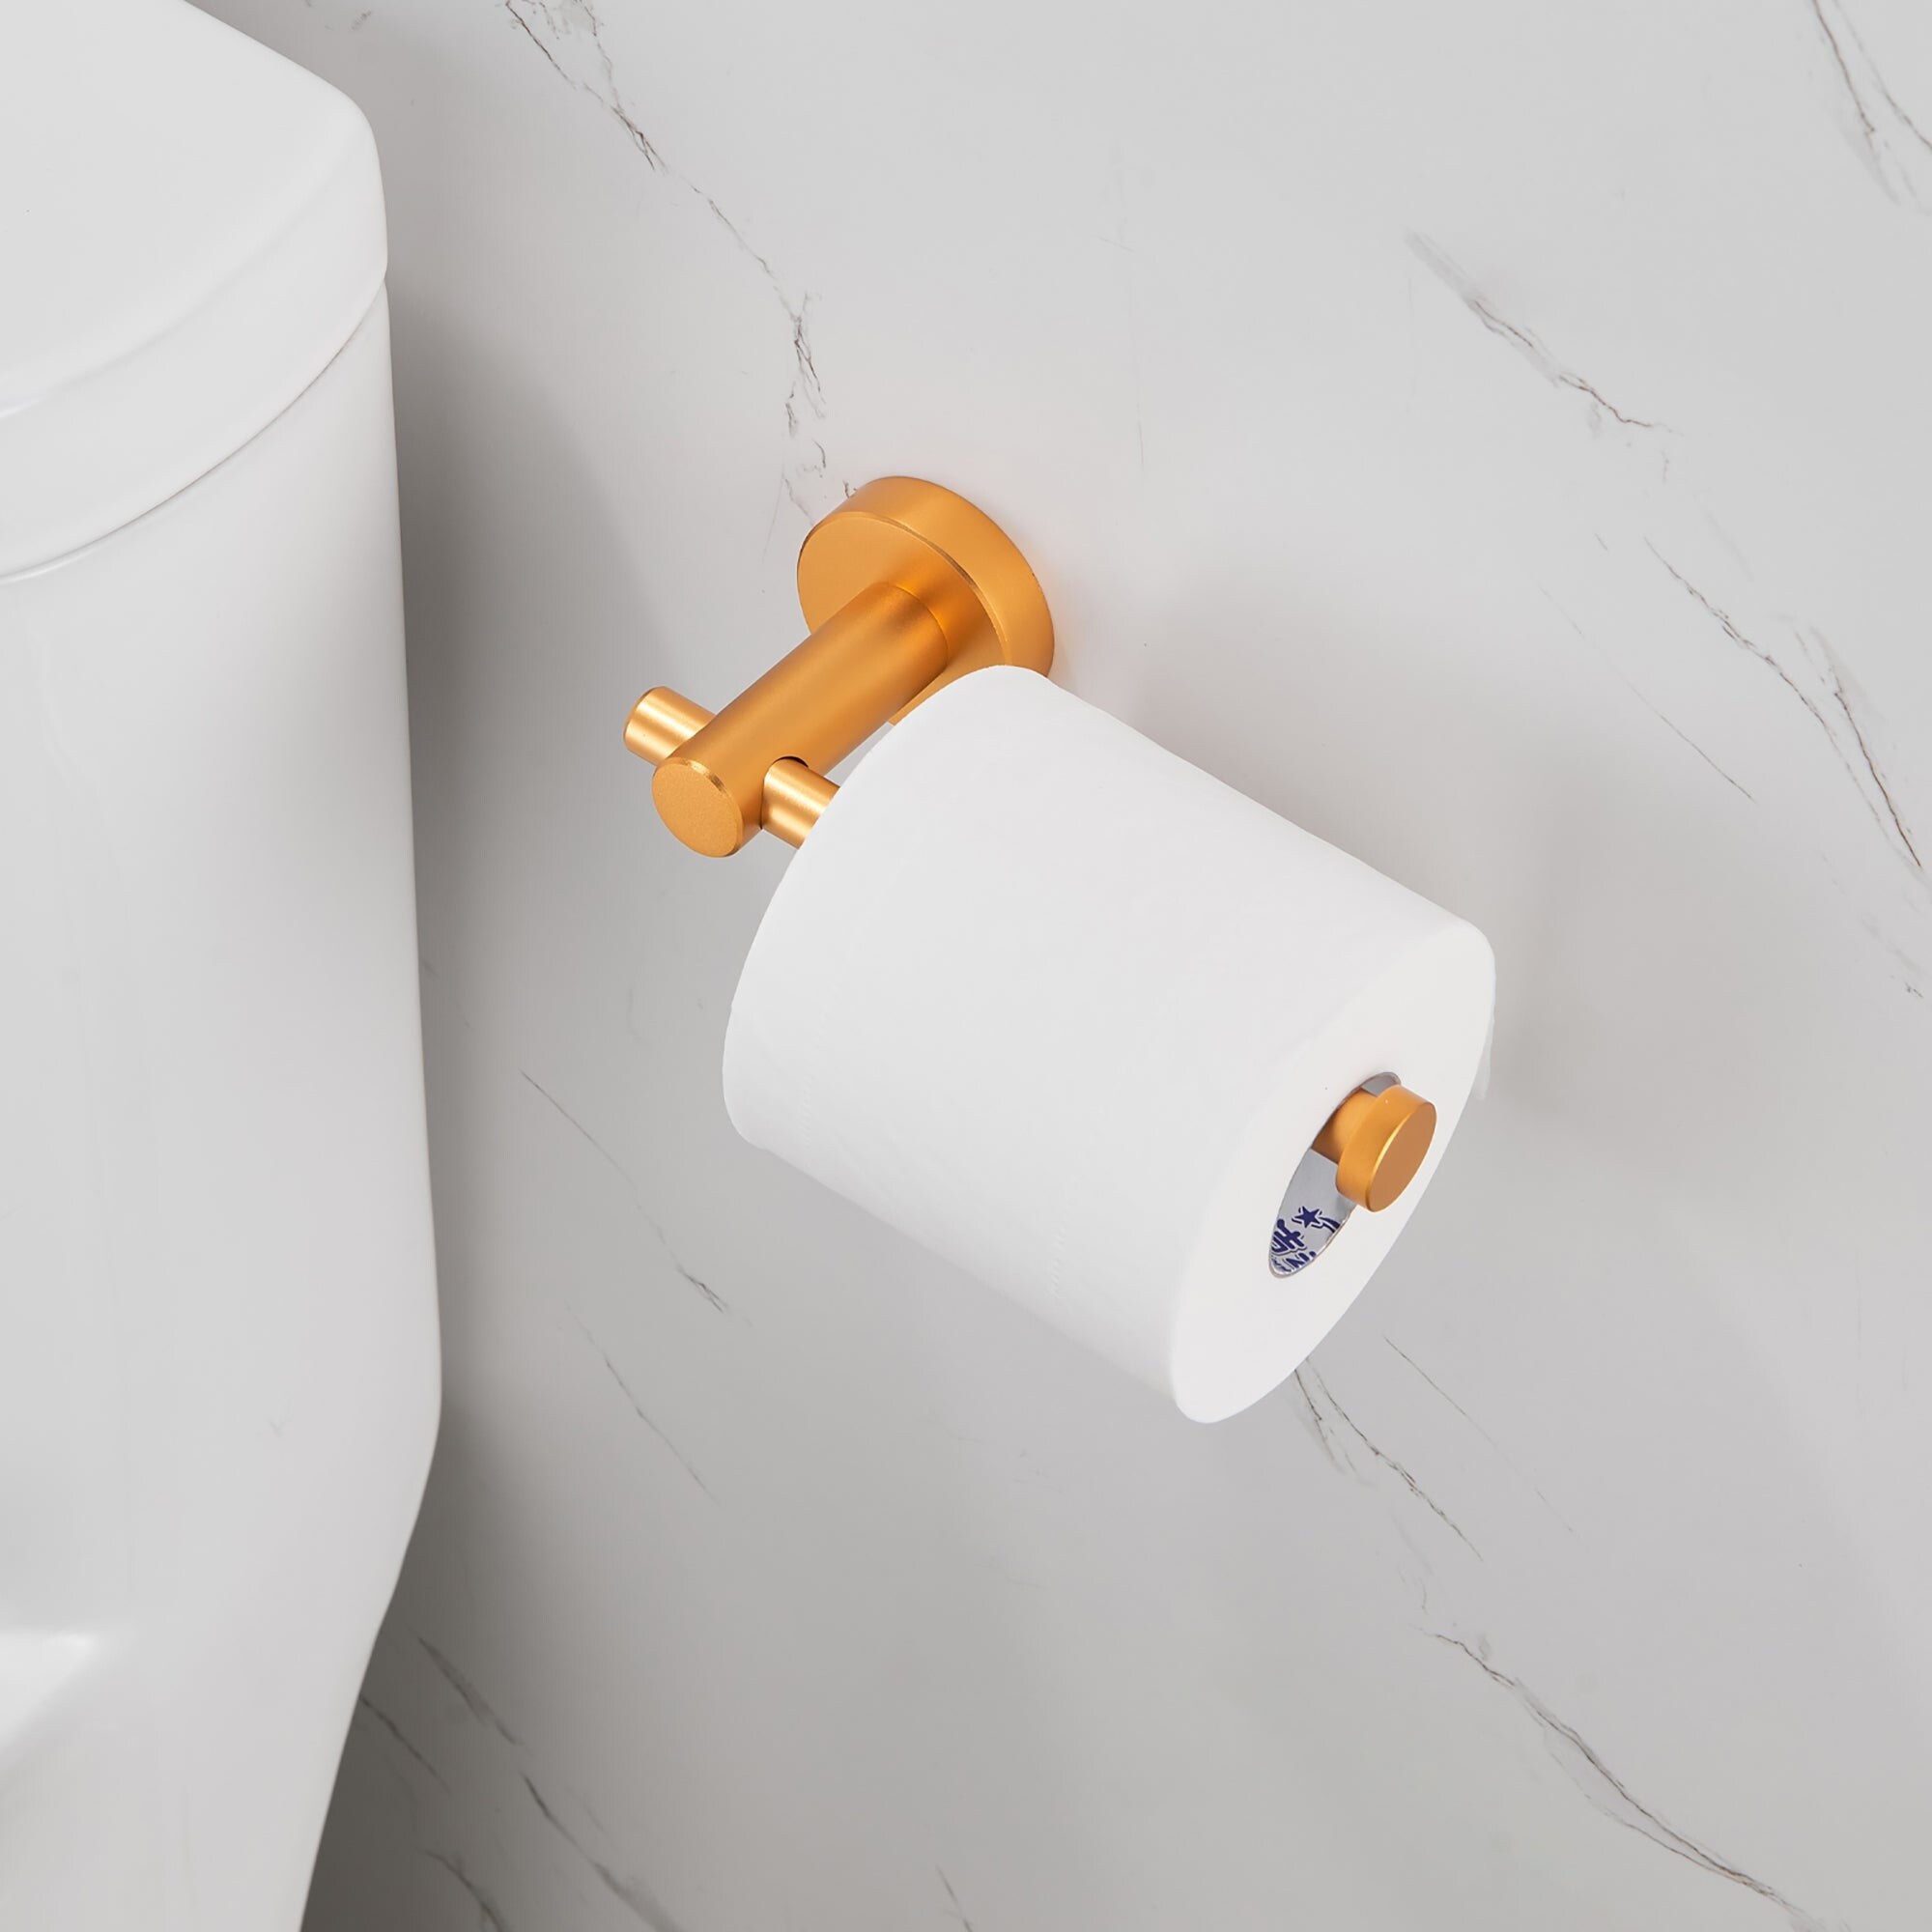 https://ak1.ostkcdn.com/images/products/is/images/direct/ce9661953ba02886494f738cc1371962324167eb/Wall-Mounted-Toilet-Paper-Holder.jpg